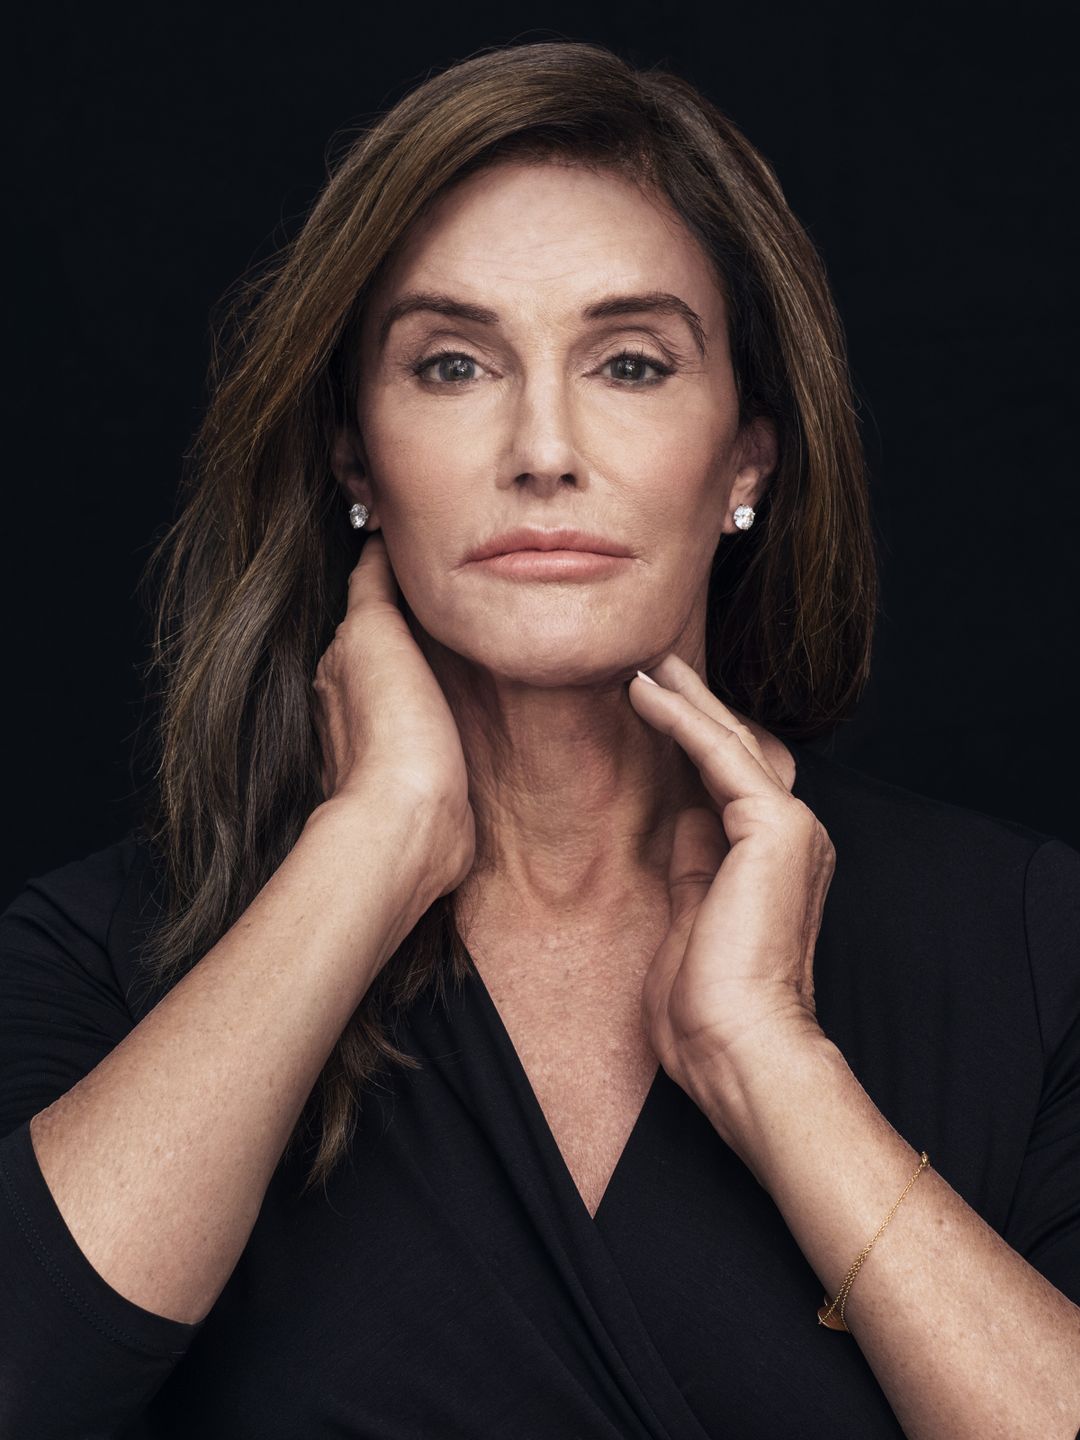 Caitlyn Jenner dating history